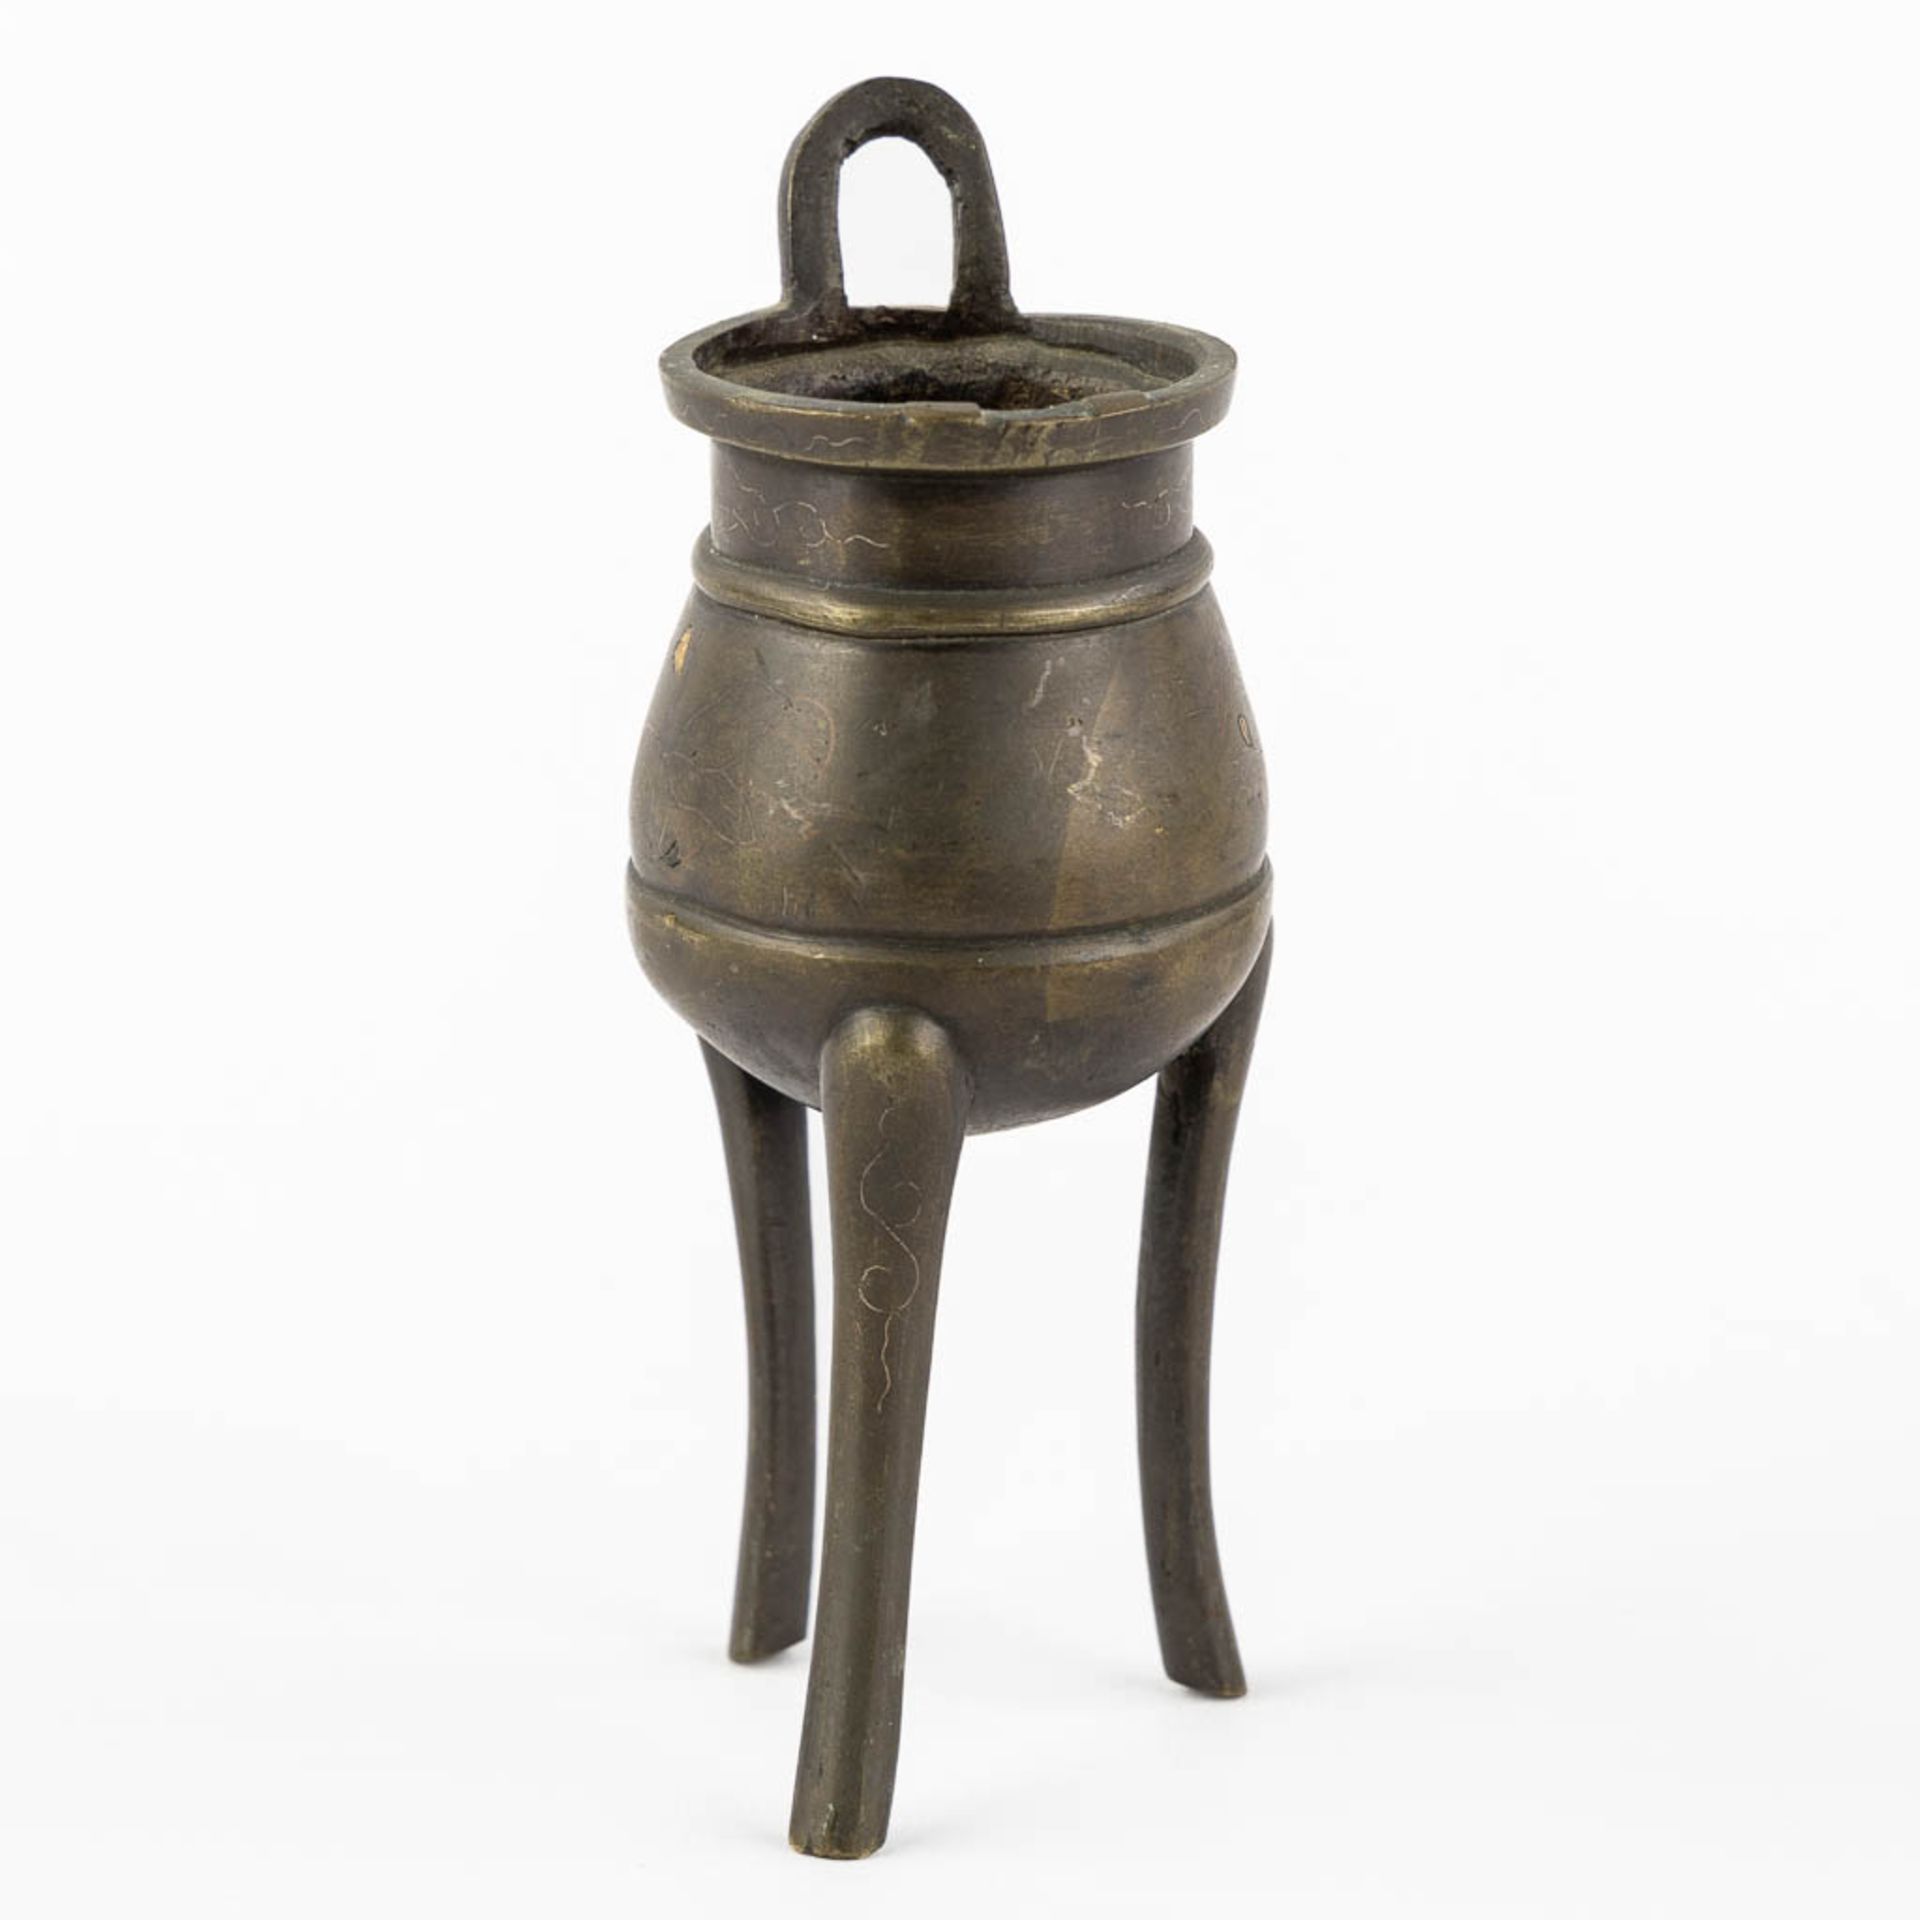 A Chinese insence burner, vase and a lucky coin. Bronze. (H:19 x D:5 cm) - Image 11 of 19